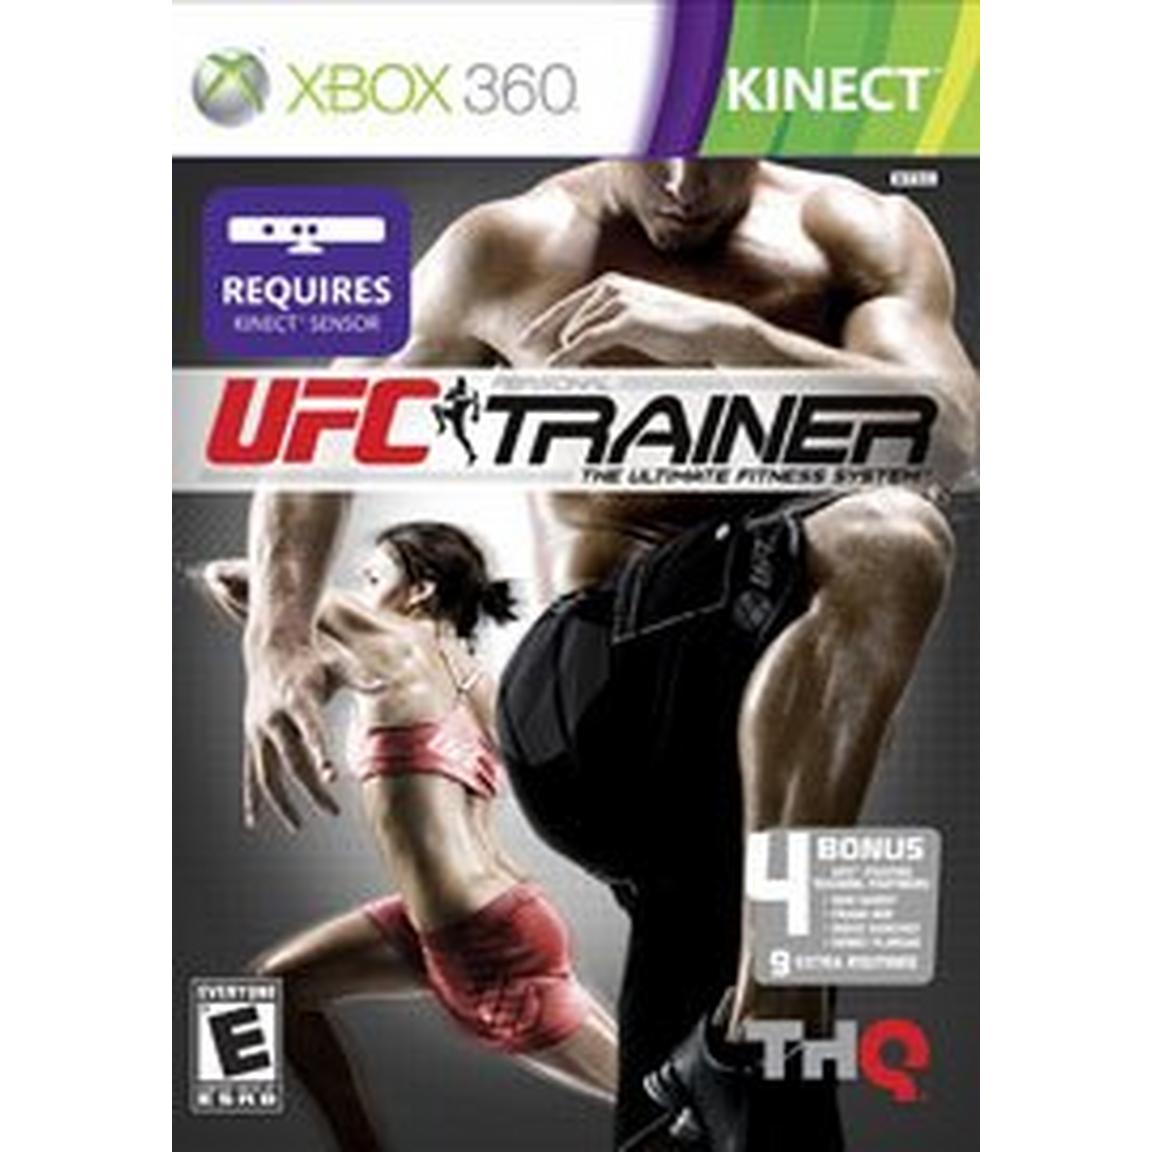 UFC Personal Trainer: The Ultimate Fitness System - Xbox 360, Pre-Owned